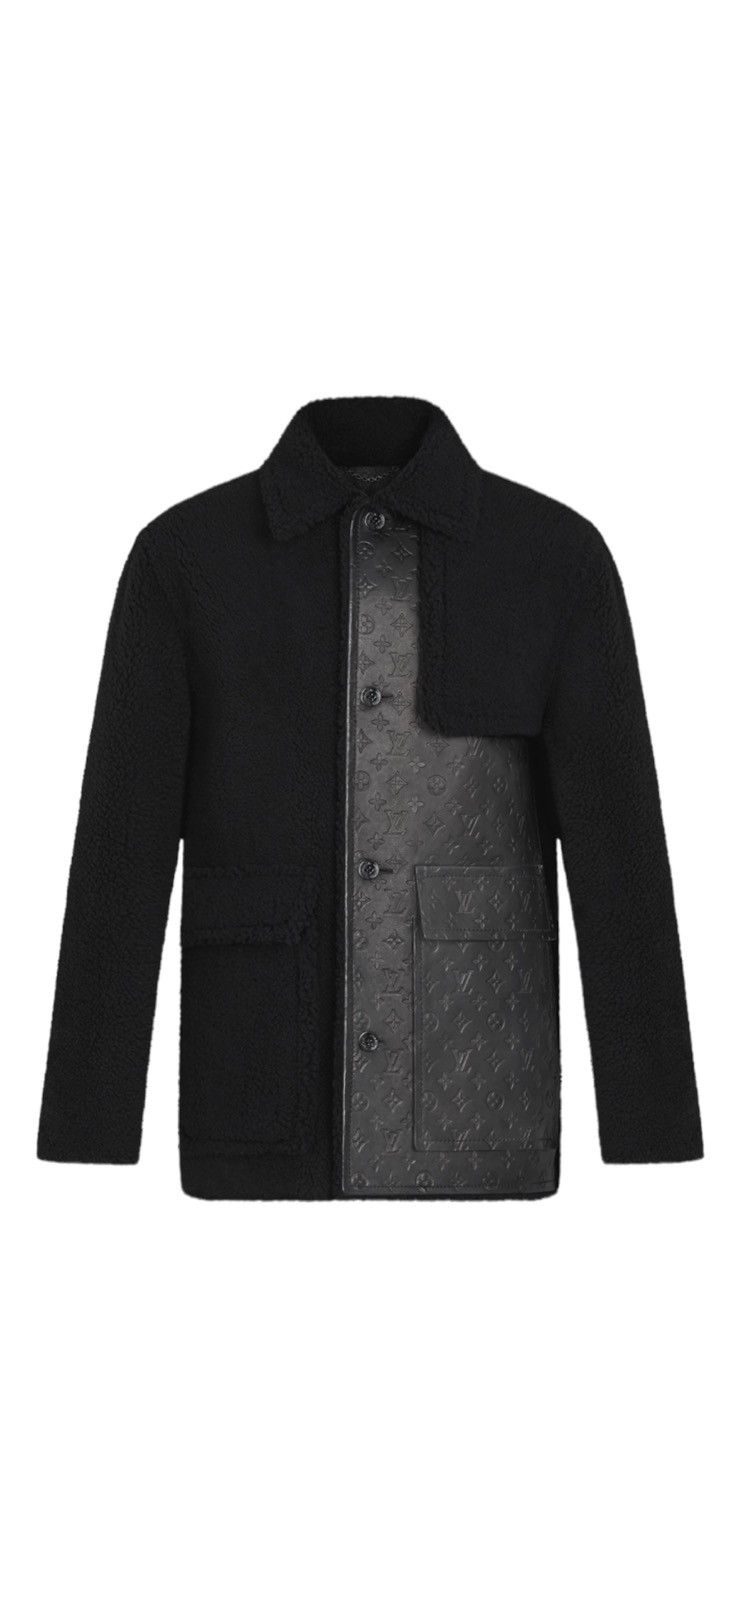 Louis Vuitton 2019 Contrast Monogram Shearling Overcoat - Grey Outerwear,  Clothing - LOU729991